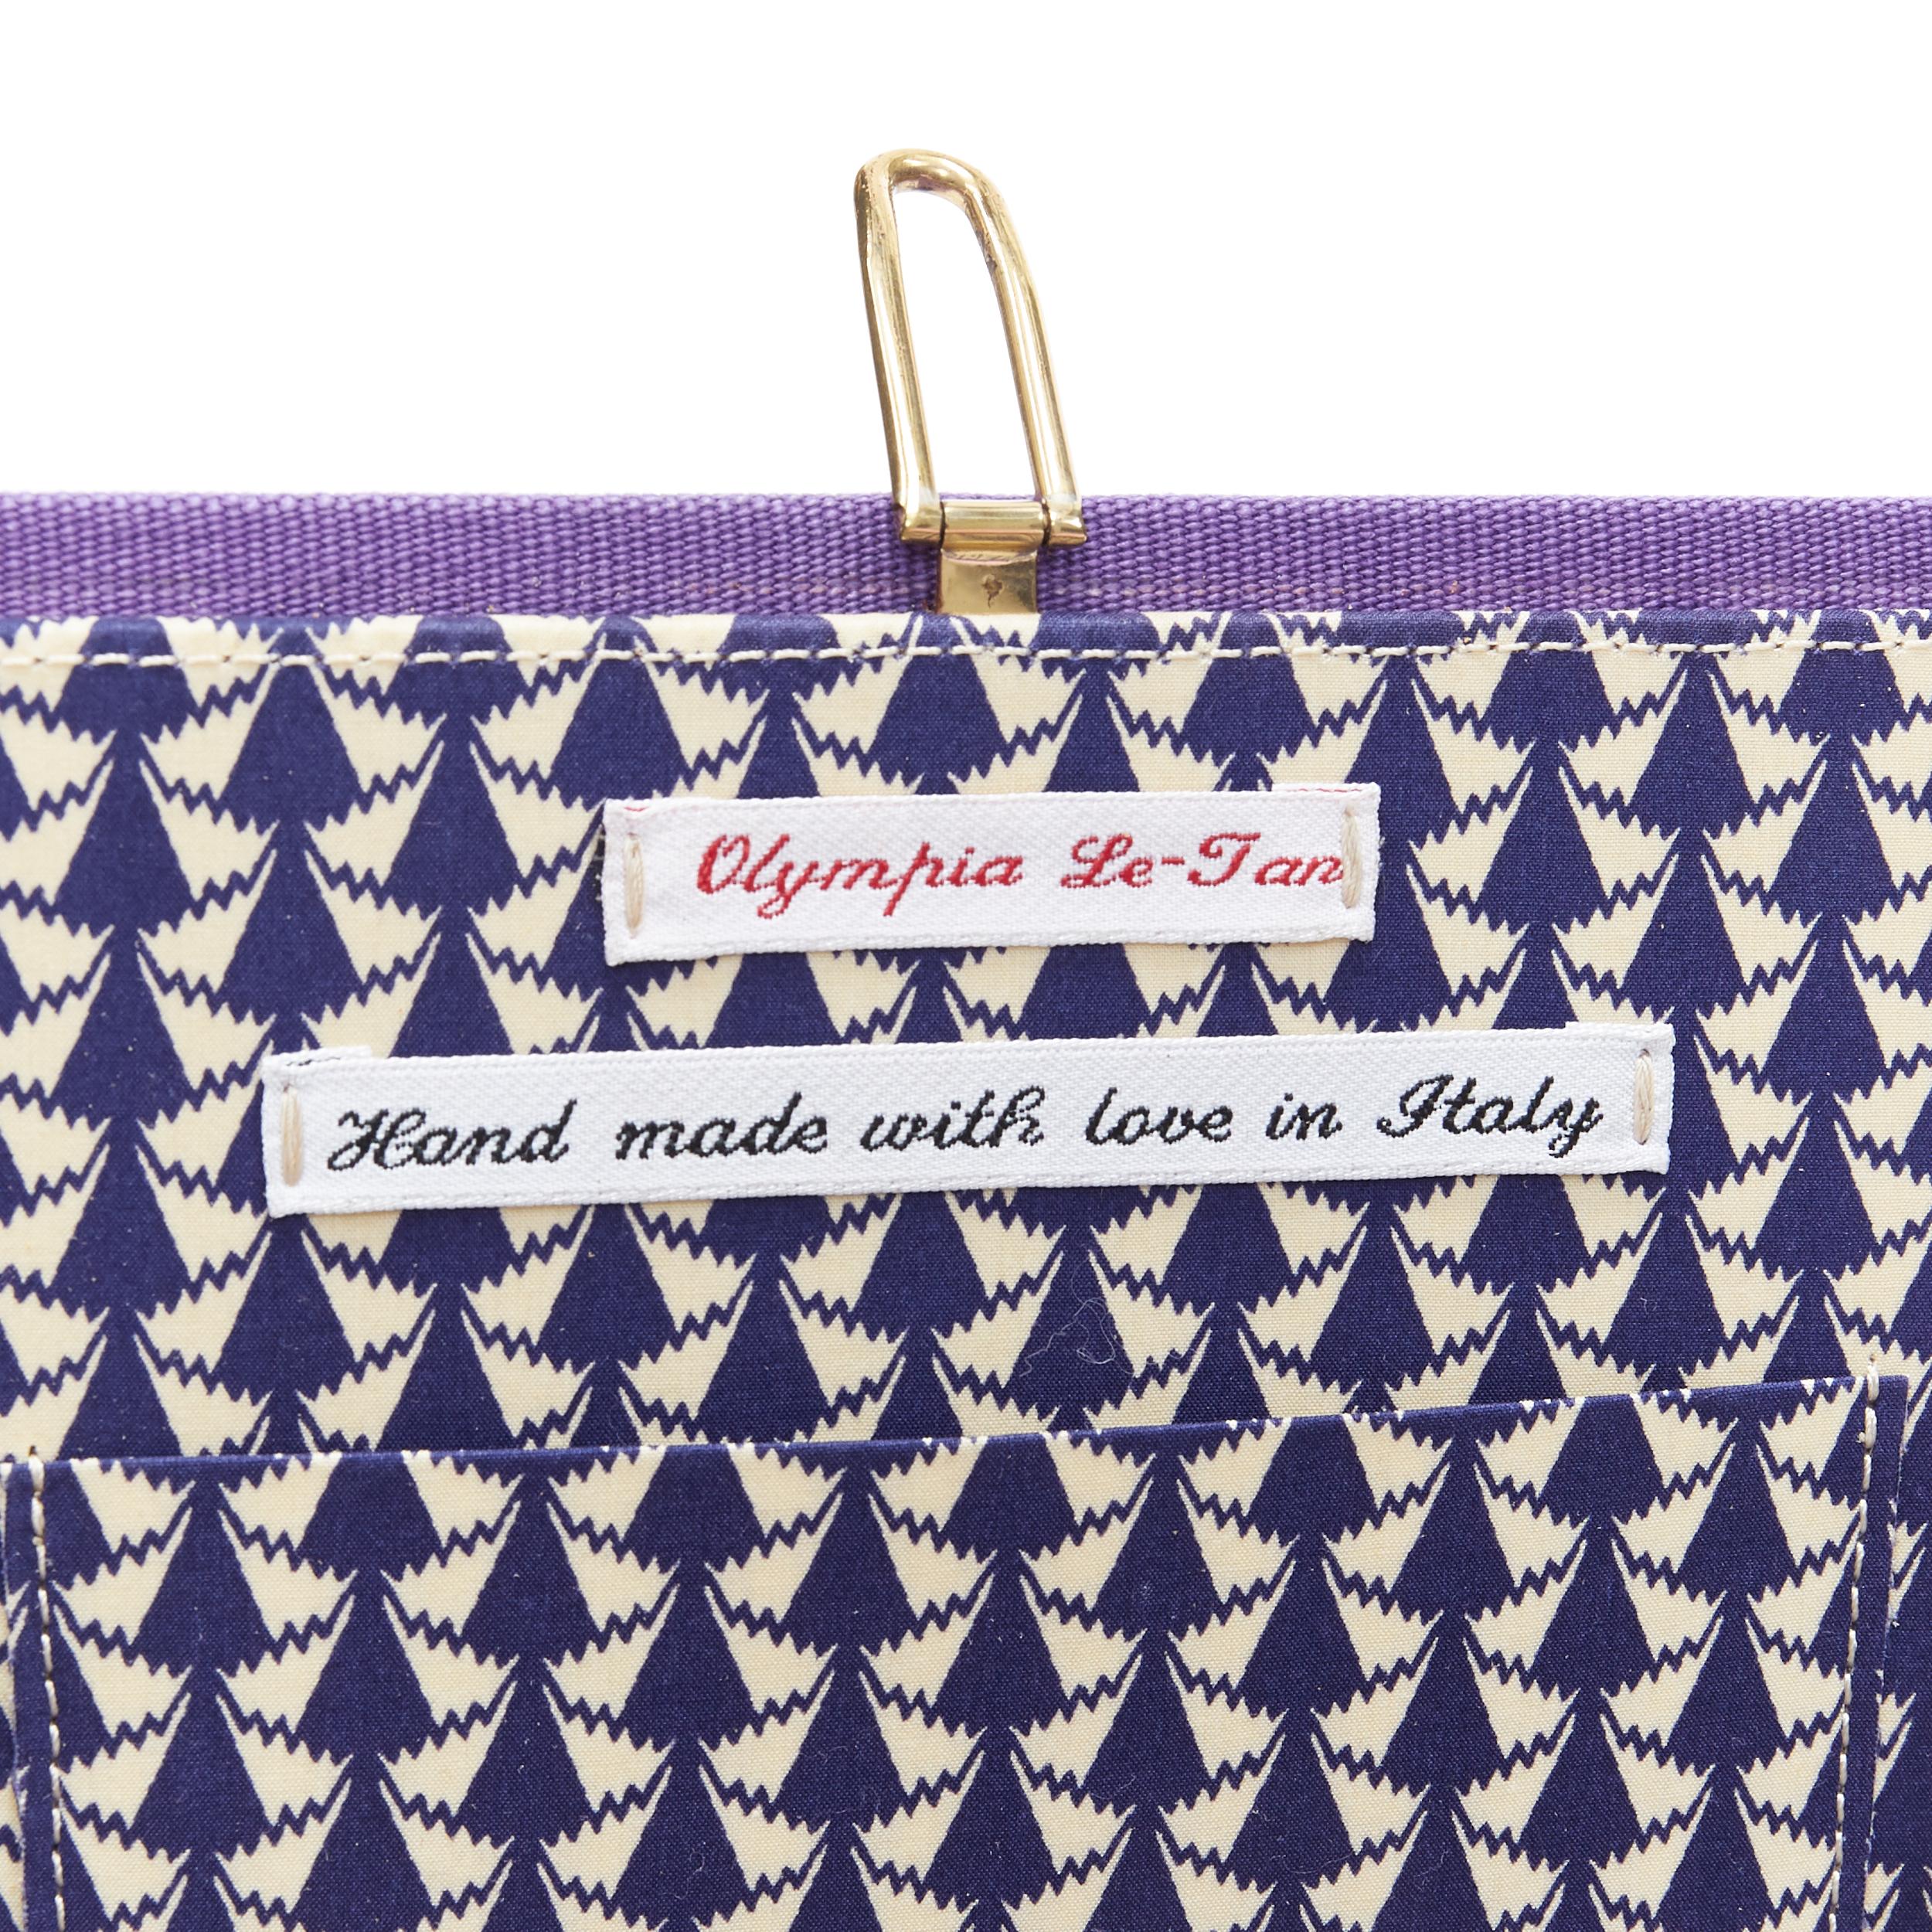 OLYMPIA LE TAN The Magician Bruno Frank purple embroidery book clutch bag 5